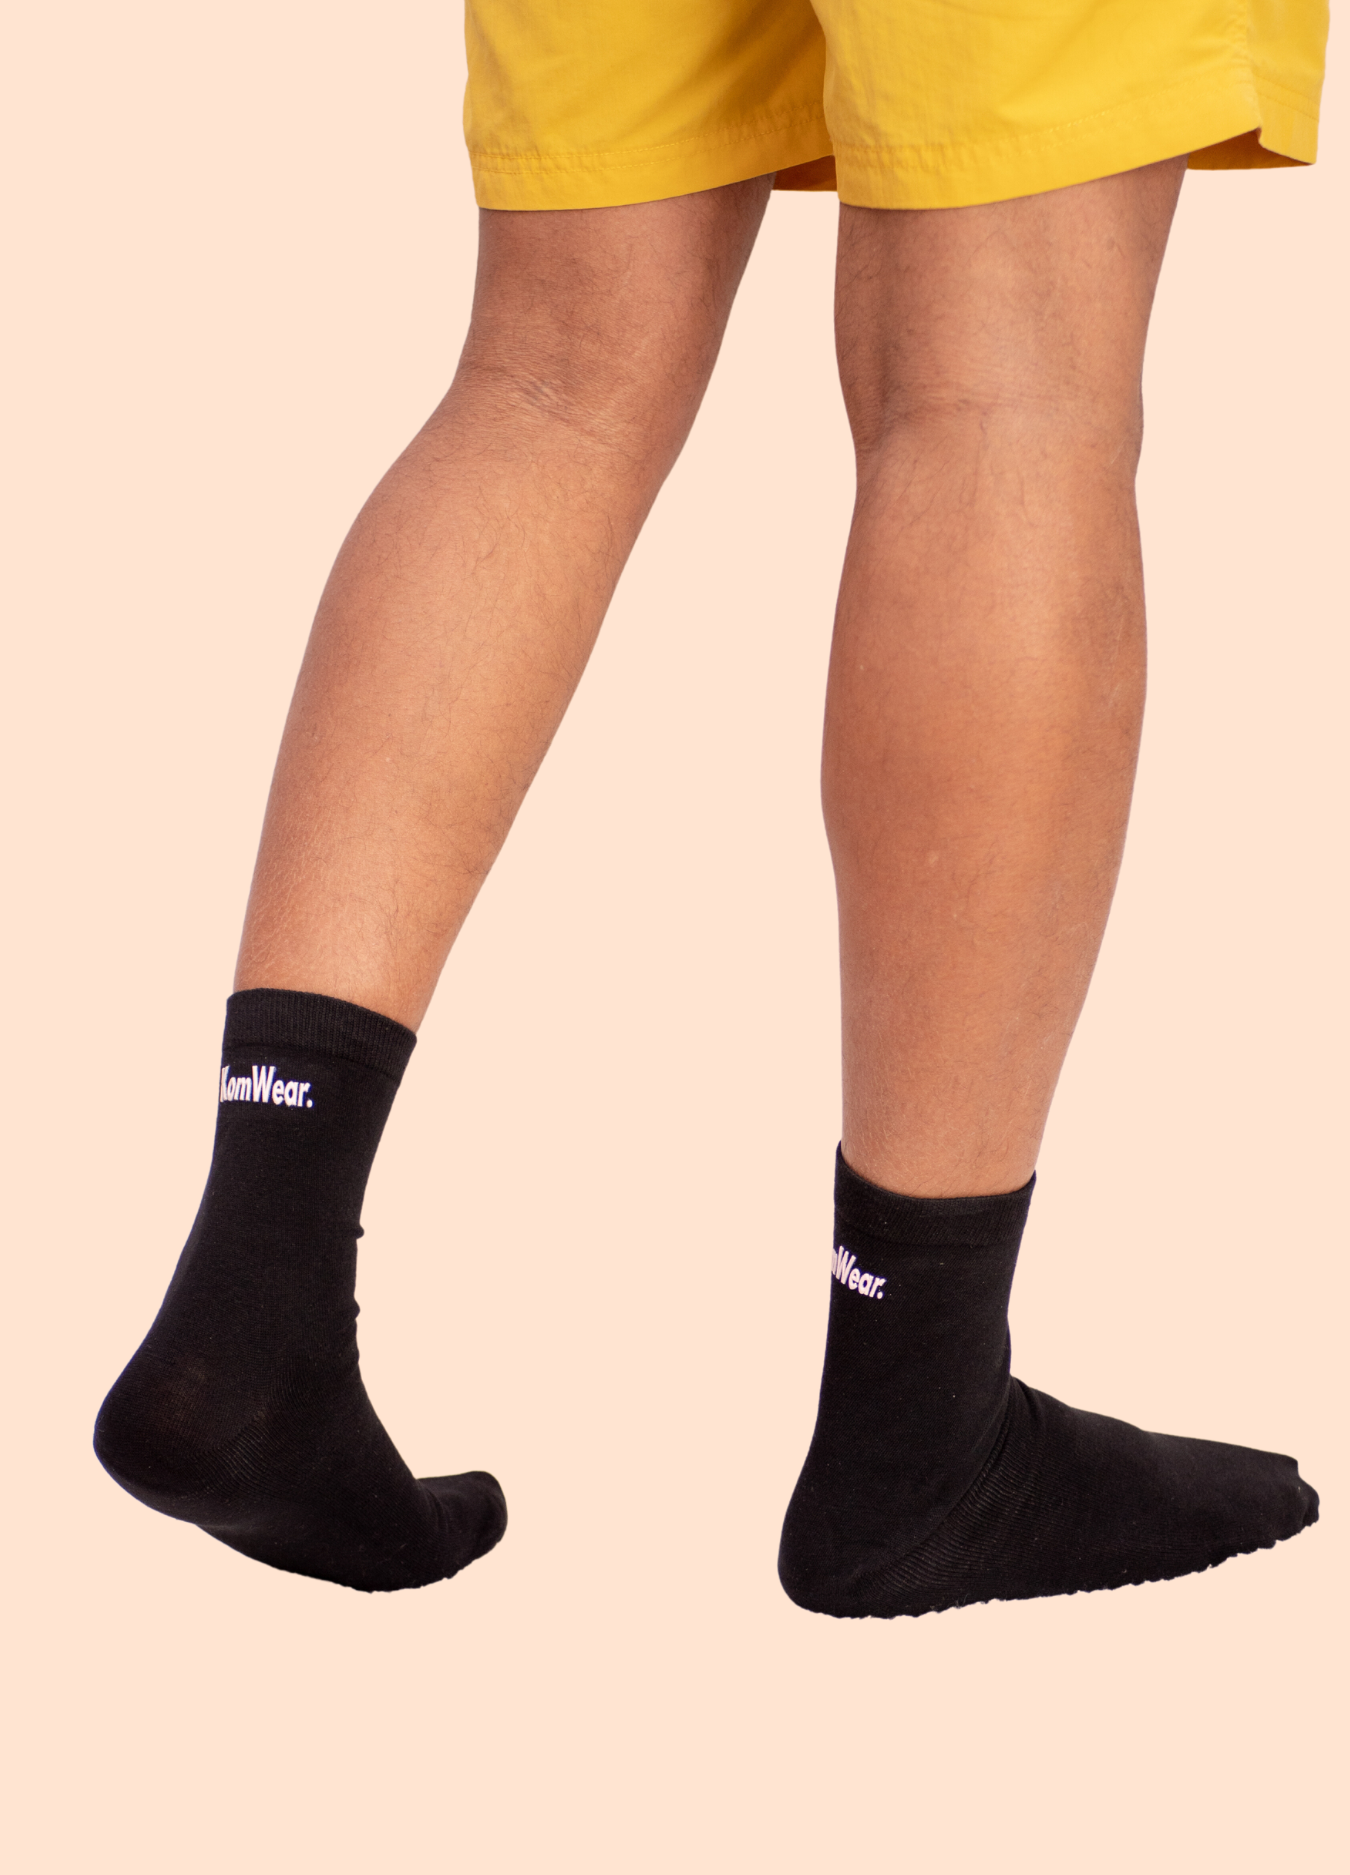 Shop Compression Socks in Australia at KomWear. Improve blood circulation, reduce swelling, and relieve fatigue with our top-notch compression socks designed for men and women of all ages. Whether you're an athlete, a frequent traveller, or simply seeking relief from leg discomfort, our compression socks are the perfect solution.